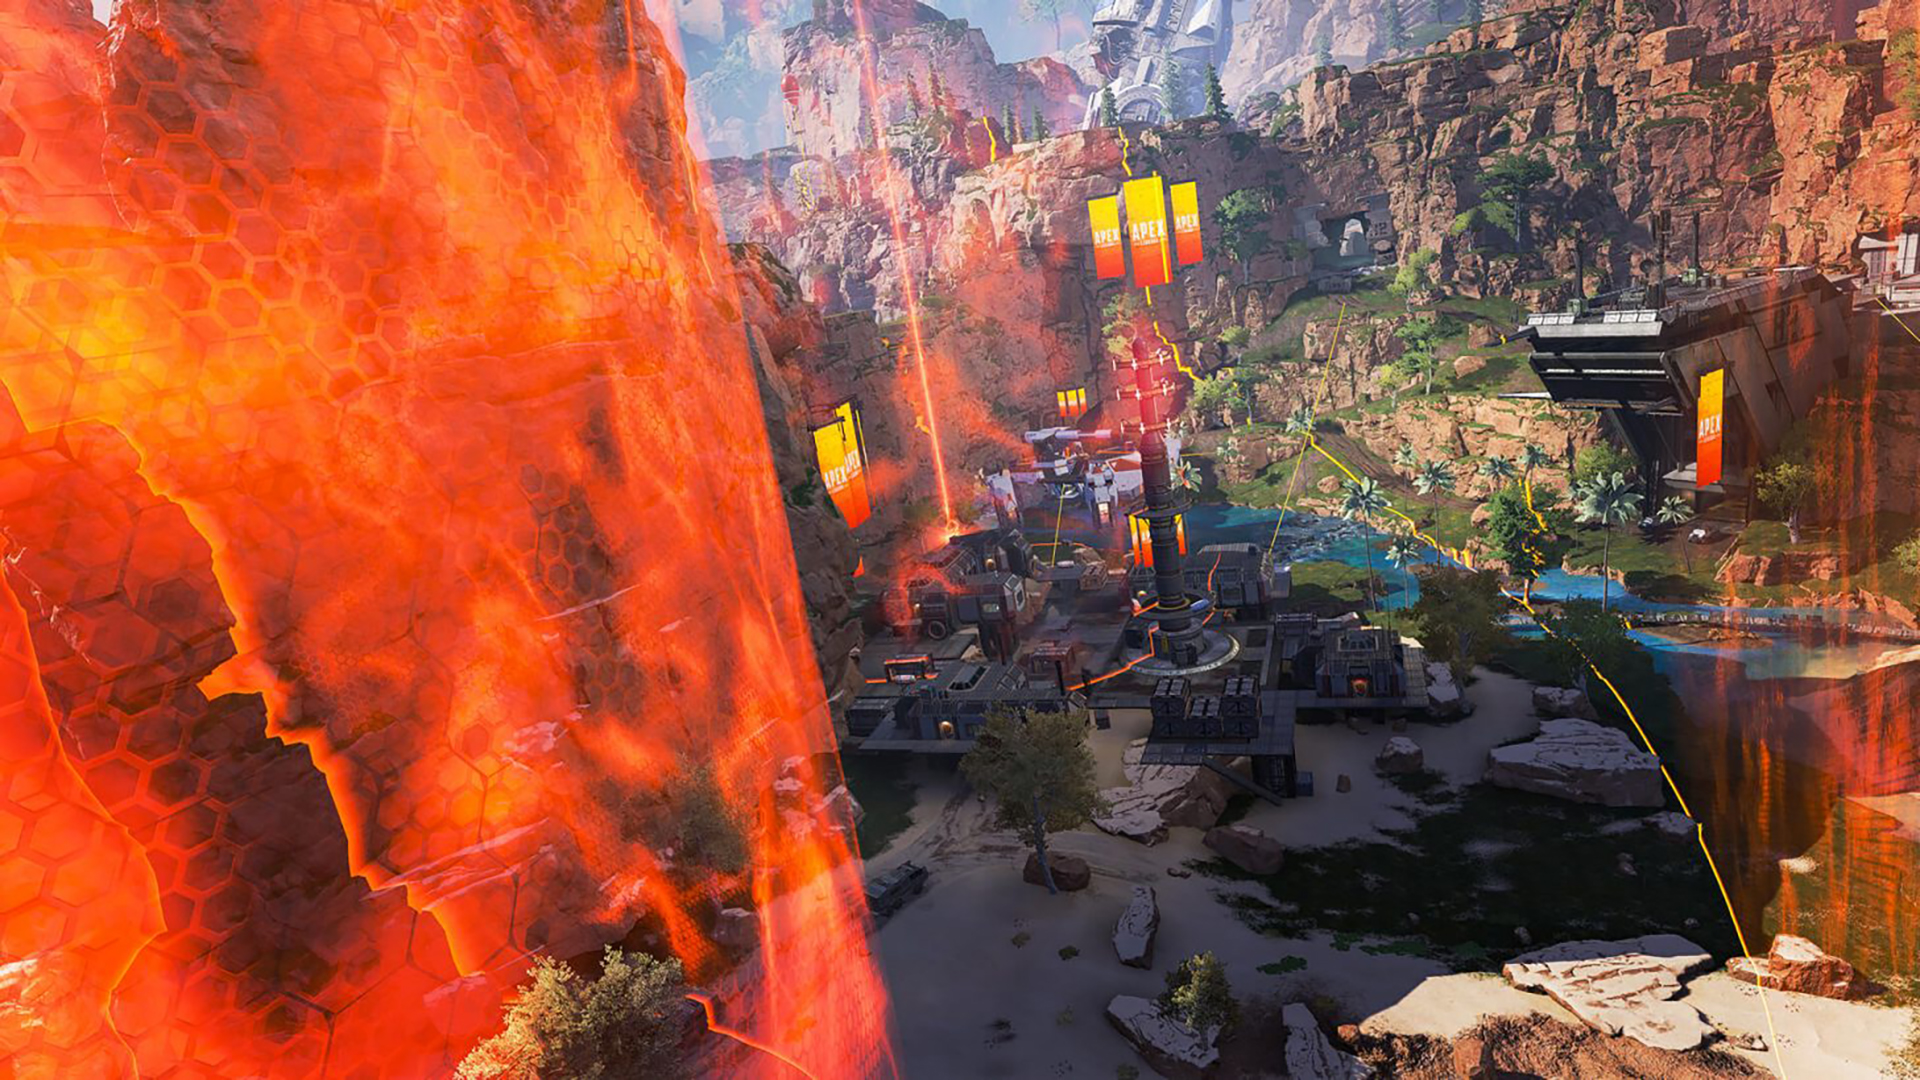 Apex Legends Ring Fury Escalation Limited Time Mode